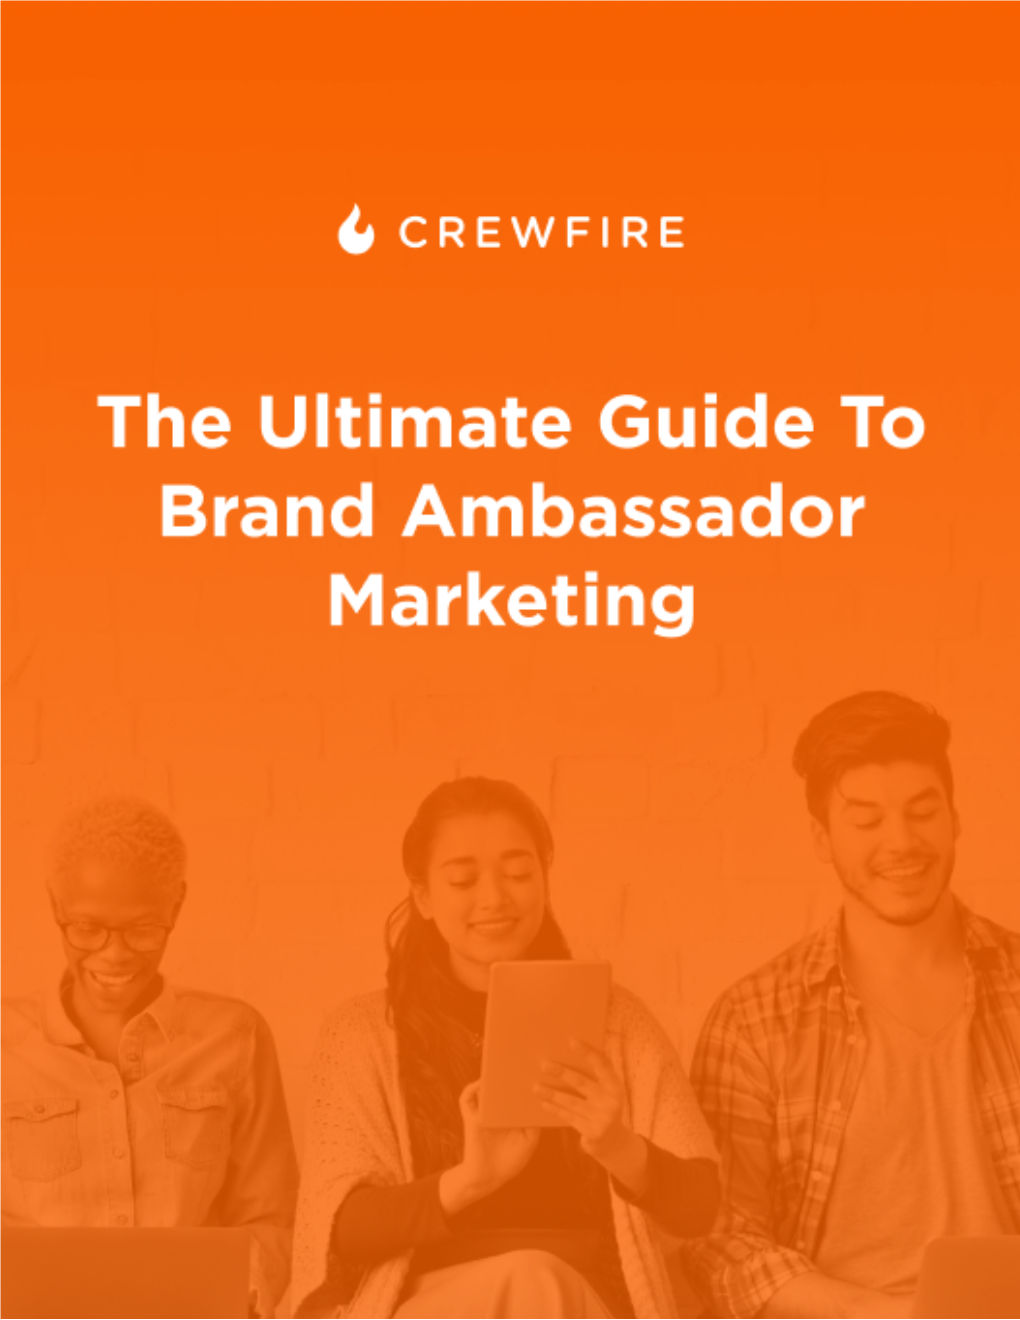 The Ultimate Guide to Brand Ambassador Marketing